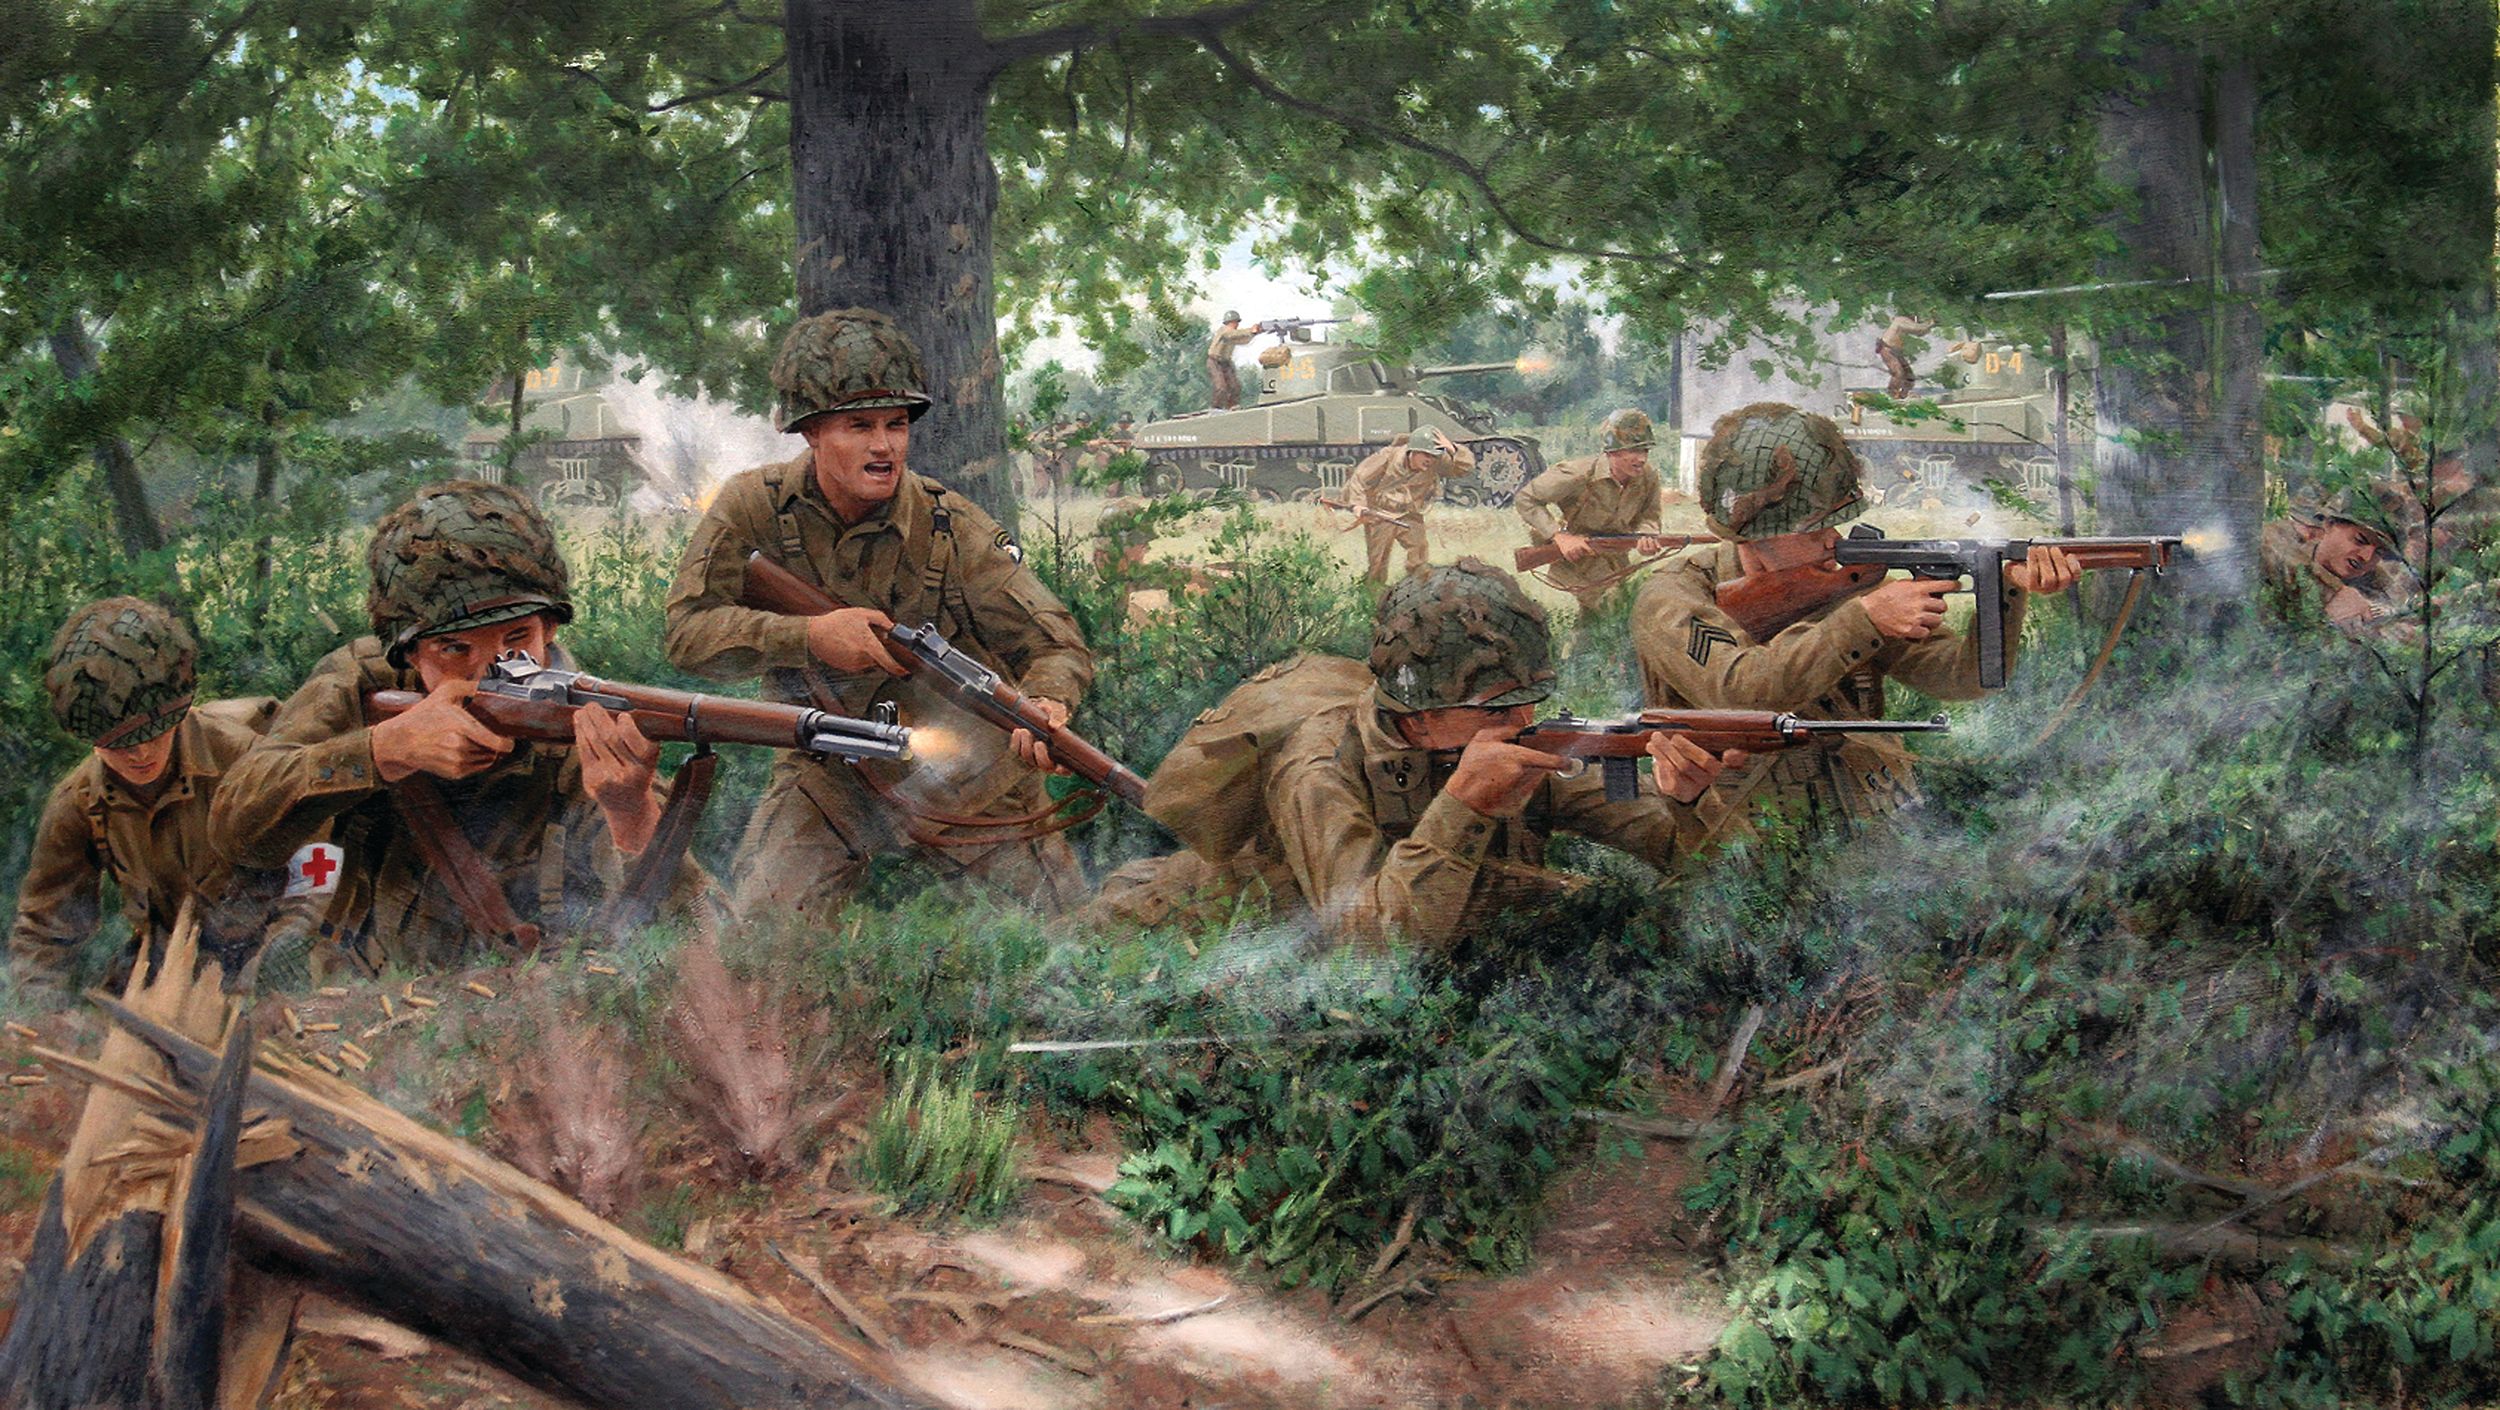 101st Airborne Division troopers, backed by Sherman tanks, battle the Germans in the woods surrounding Bloody Gulch in Normandy, June 1944, where Lieutenant Ronald Speirs and his men fought. The paratroopers had only rifles, machine guns, and grenades with which to conduct the battle until armored forces arrived.